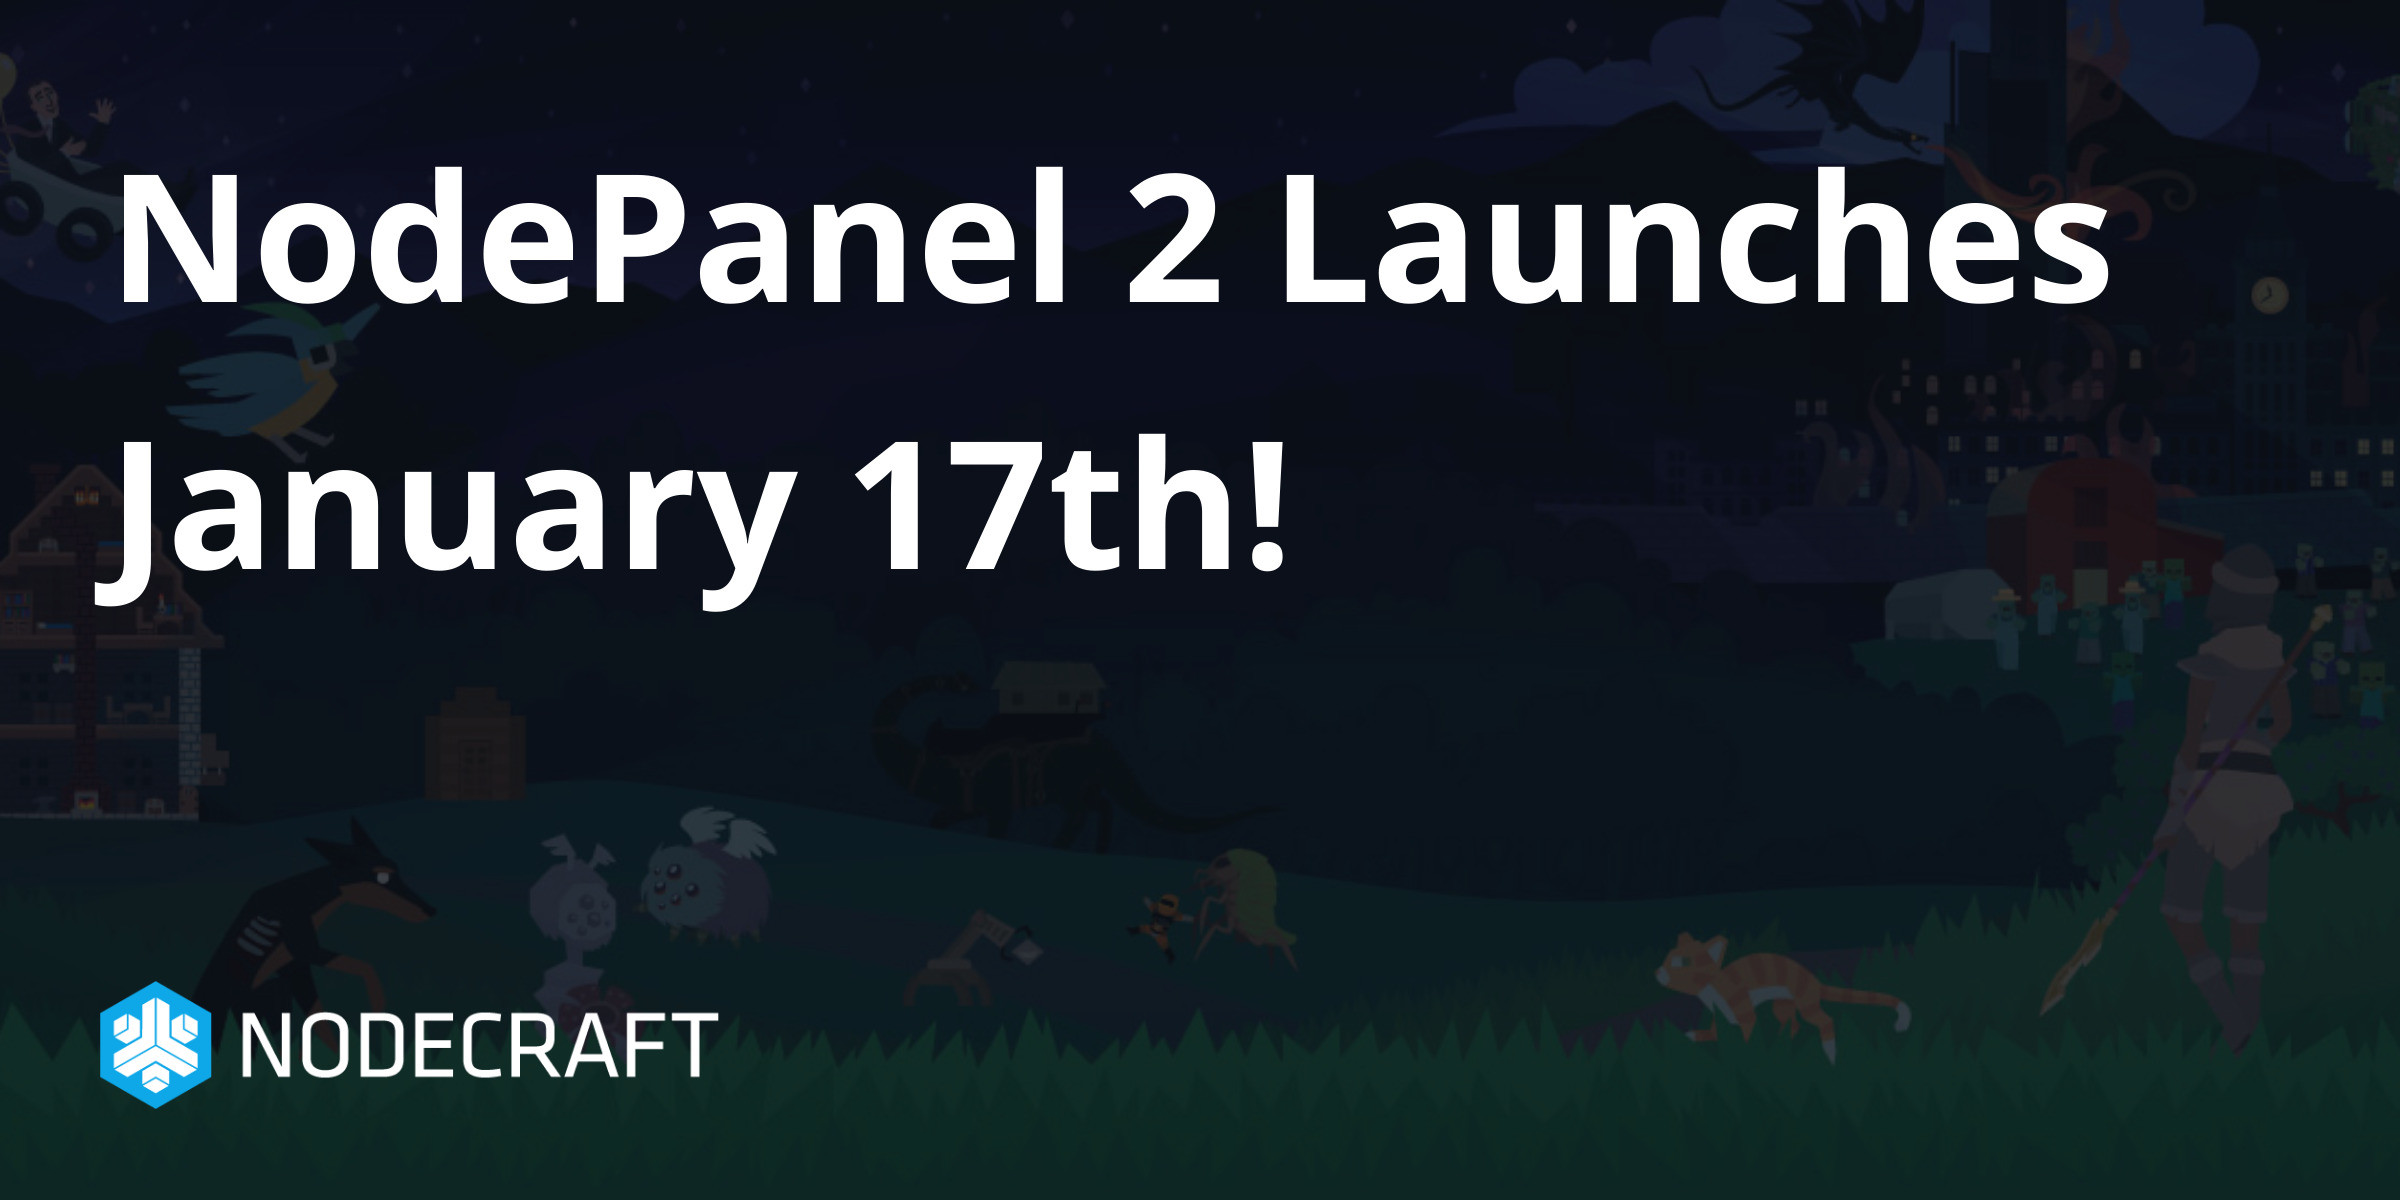 NodePanel 2 Launches January 17th!